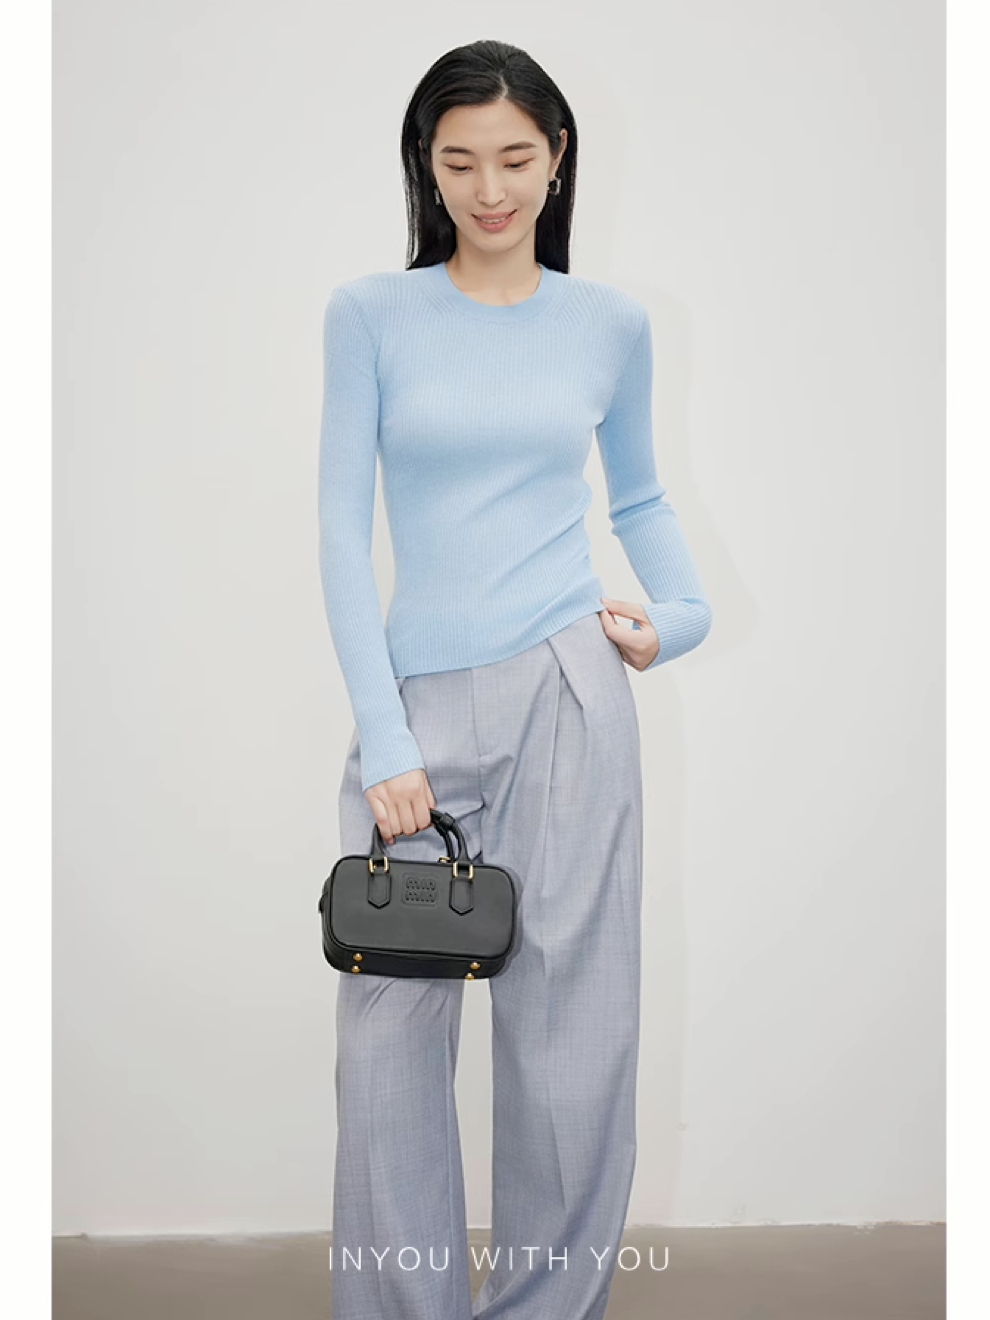 Two Type Neck Pullover Simple Ribbed Knit_BDHL4951